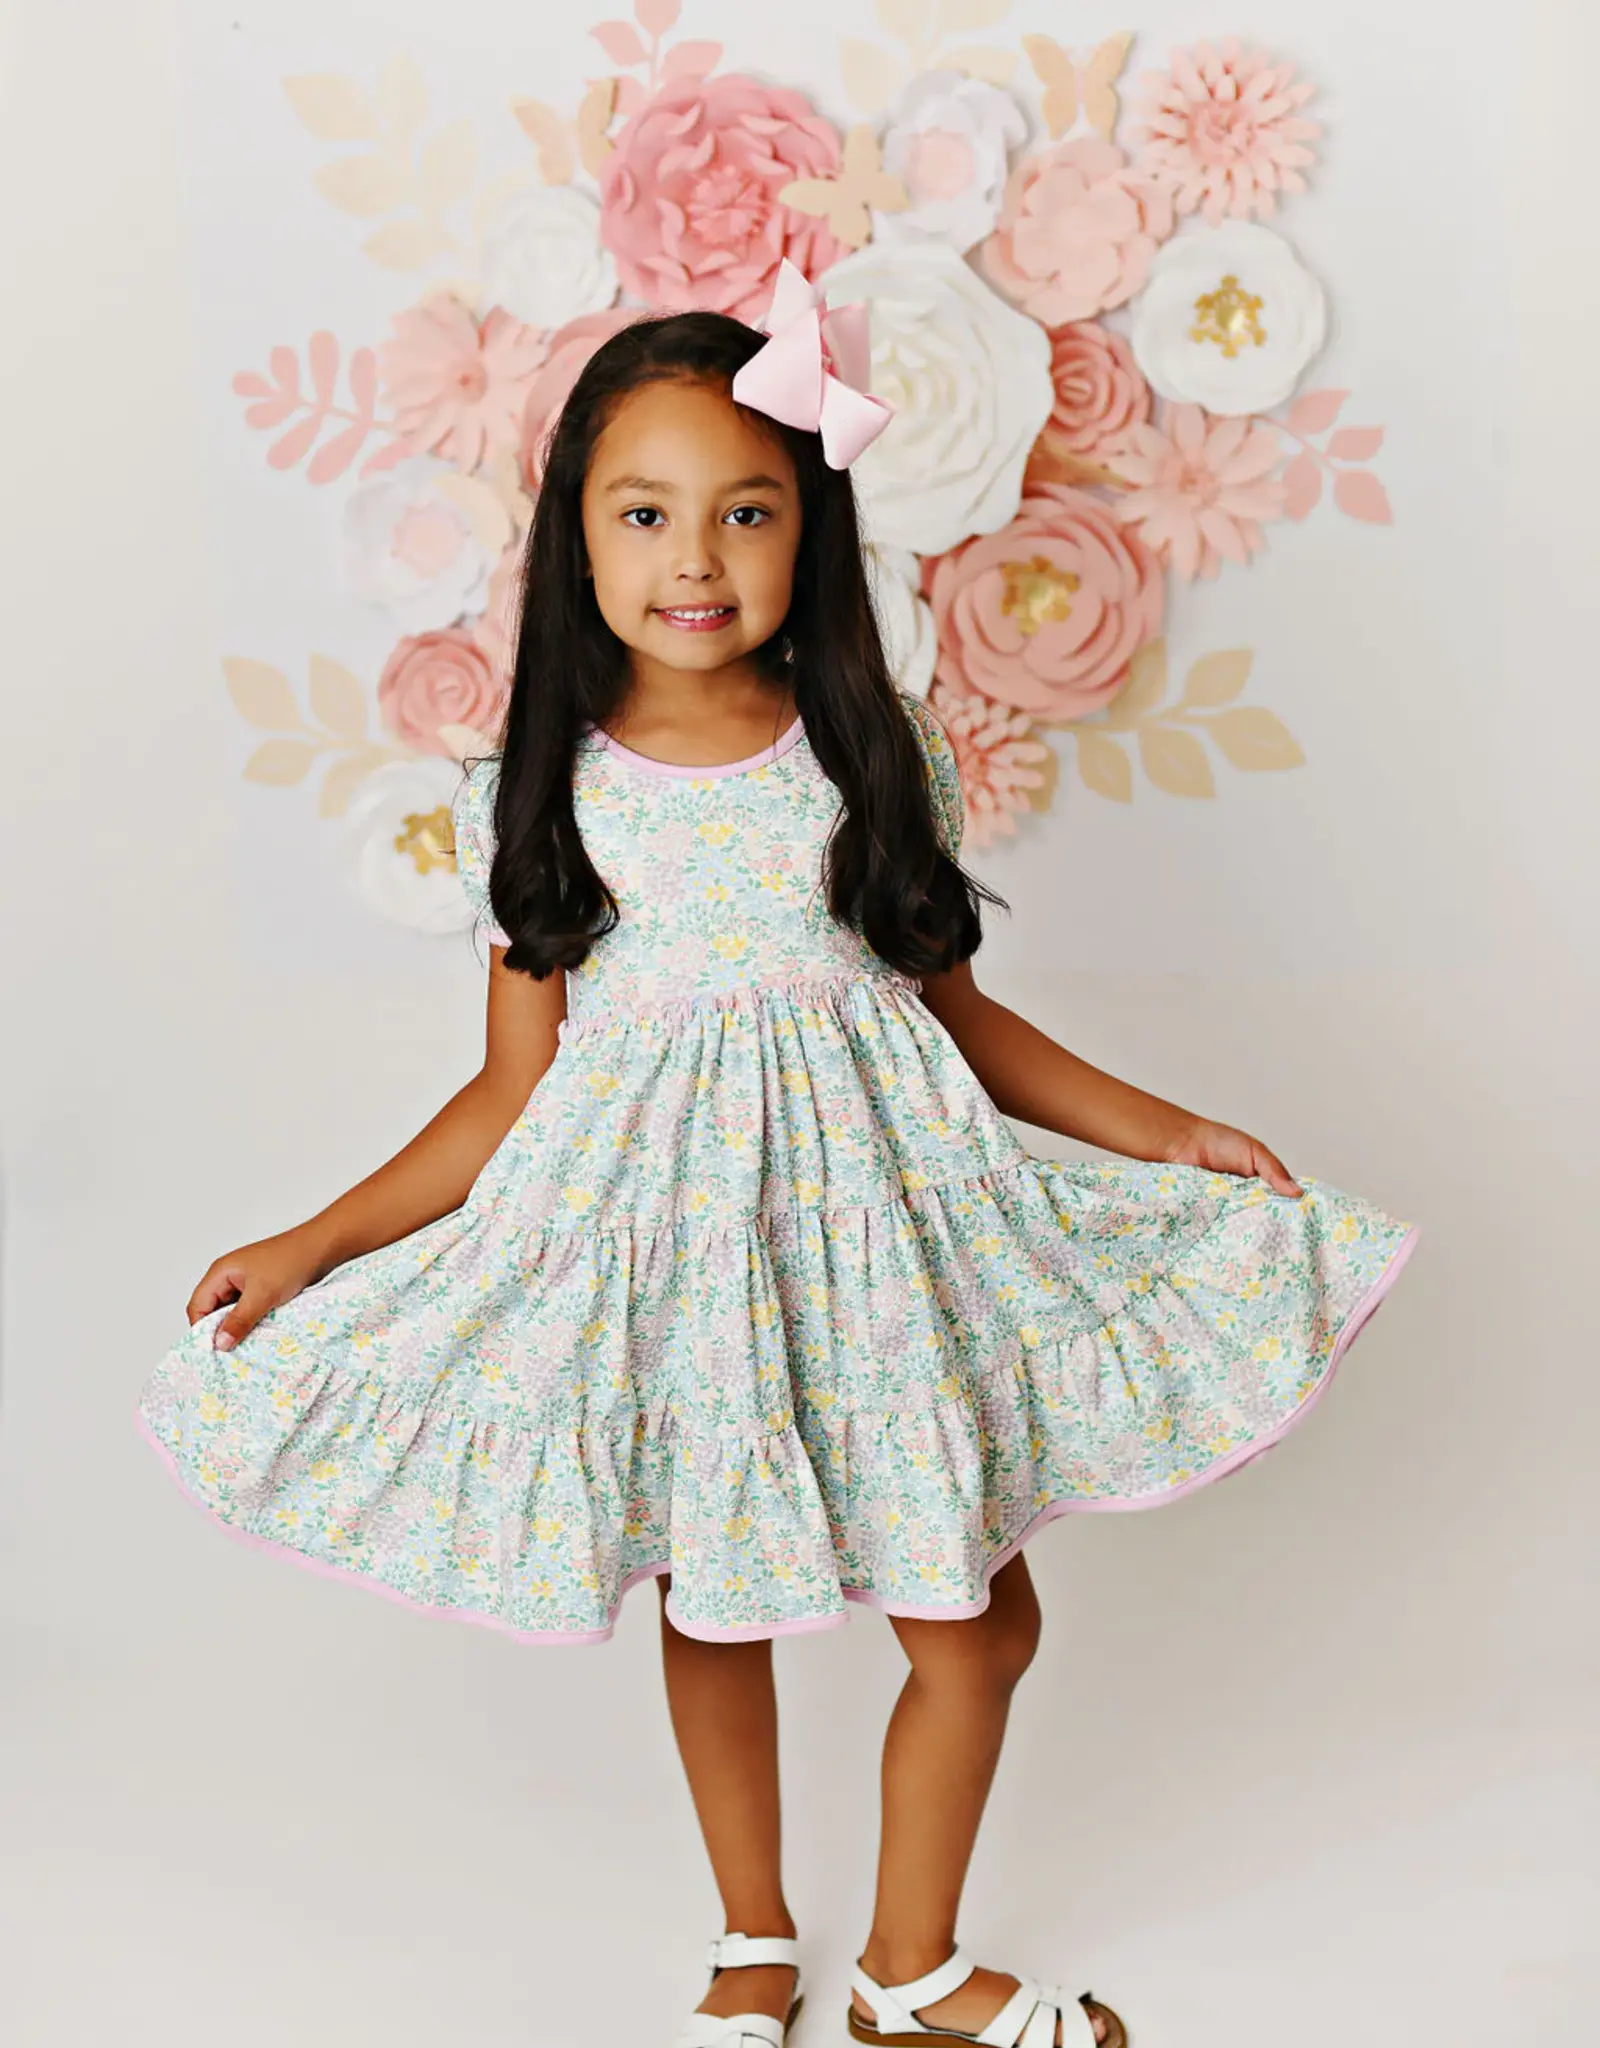 Swoon Baby 2460 Dainty Pink Floral Dress